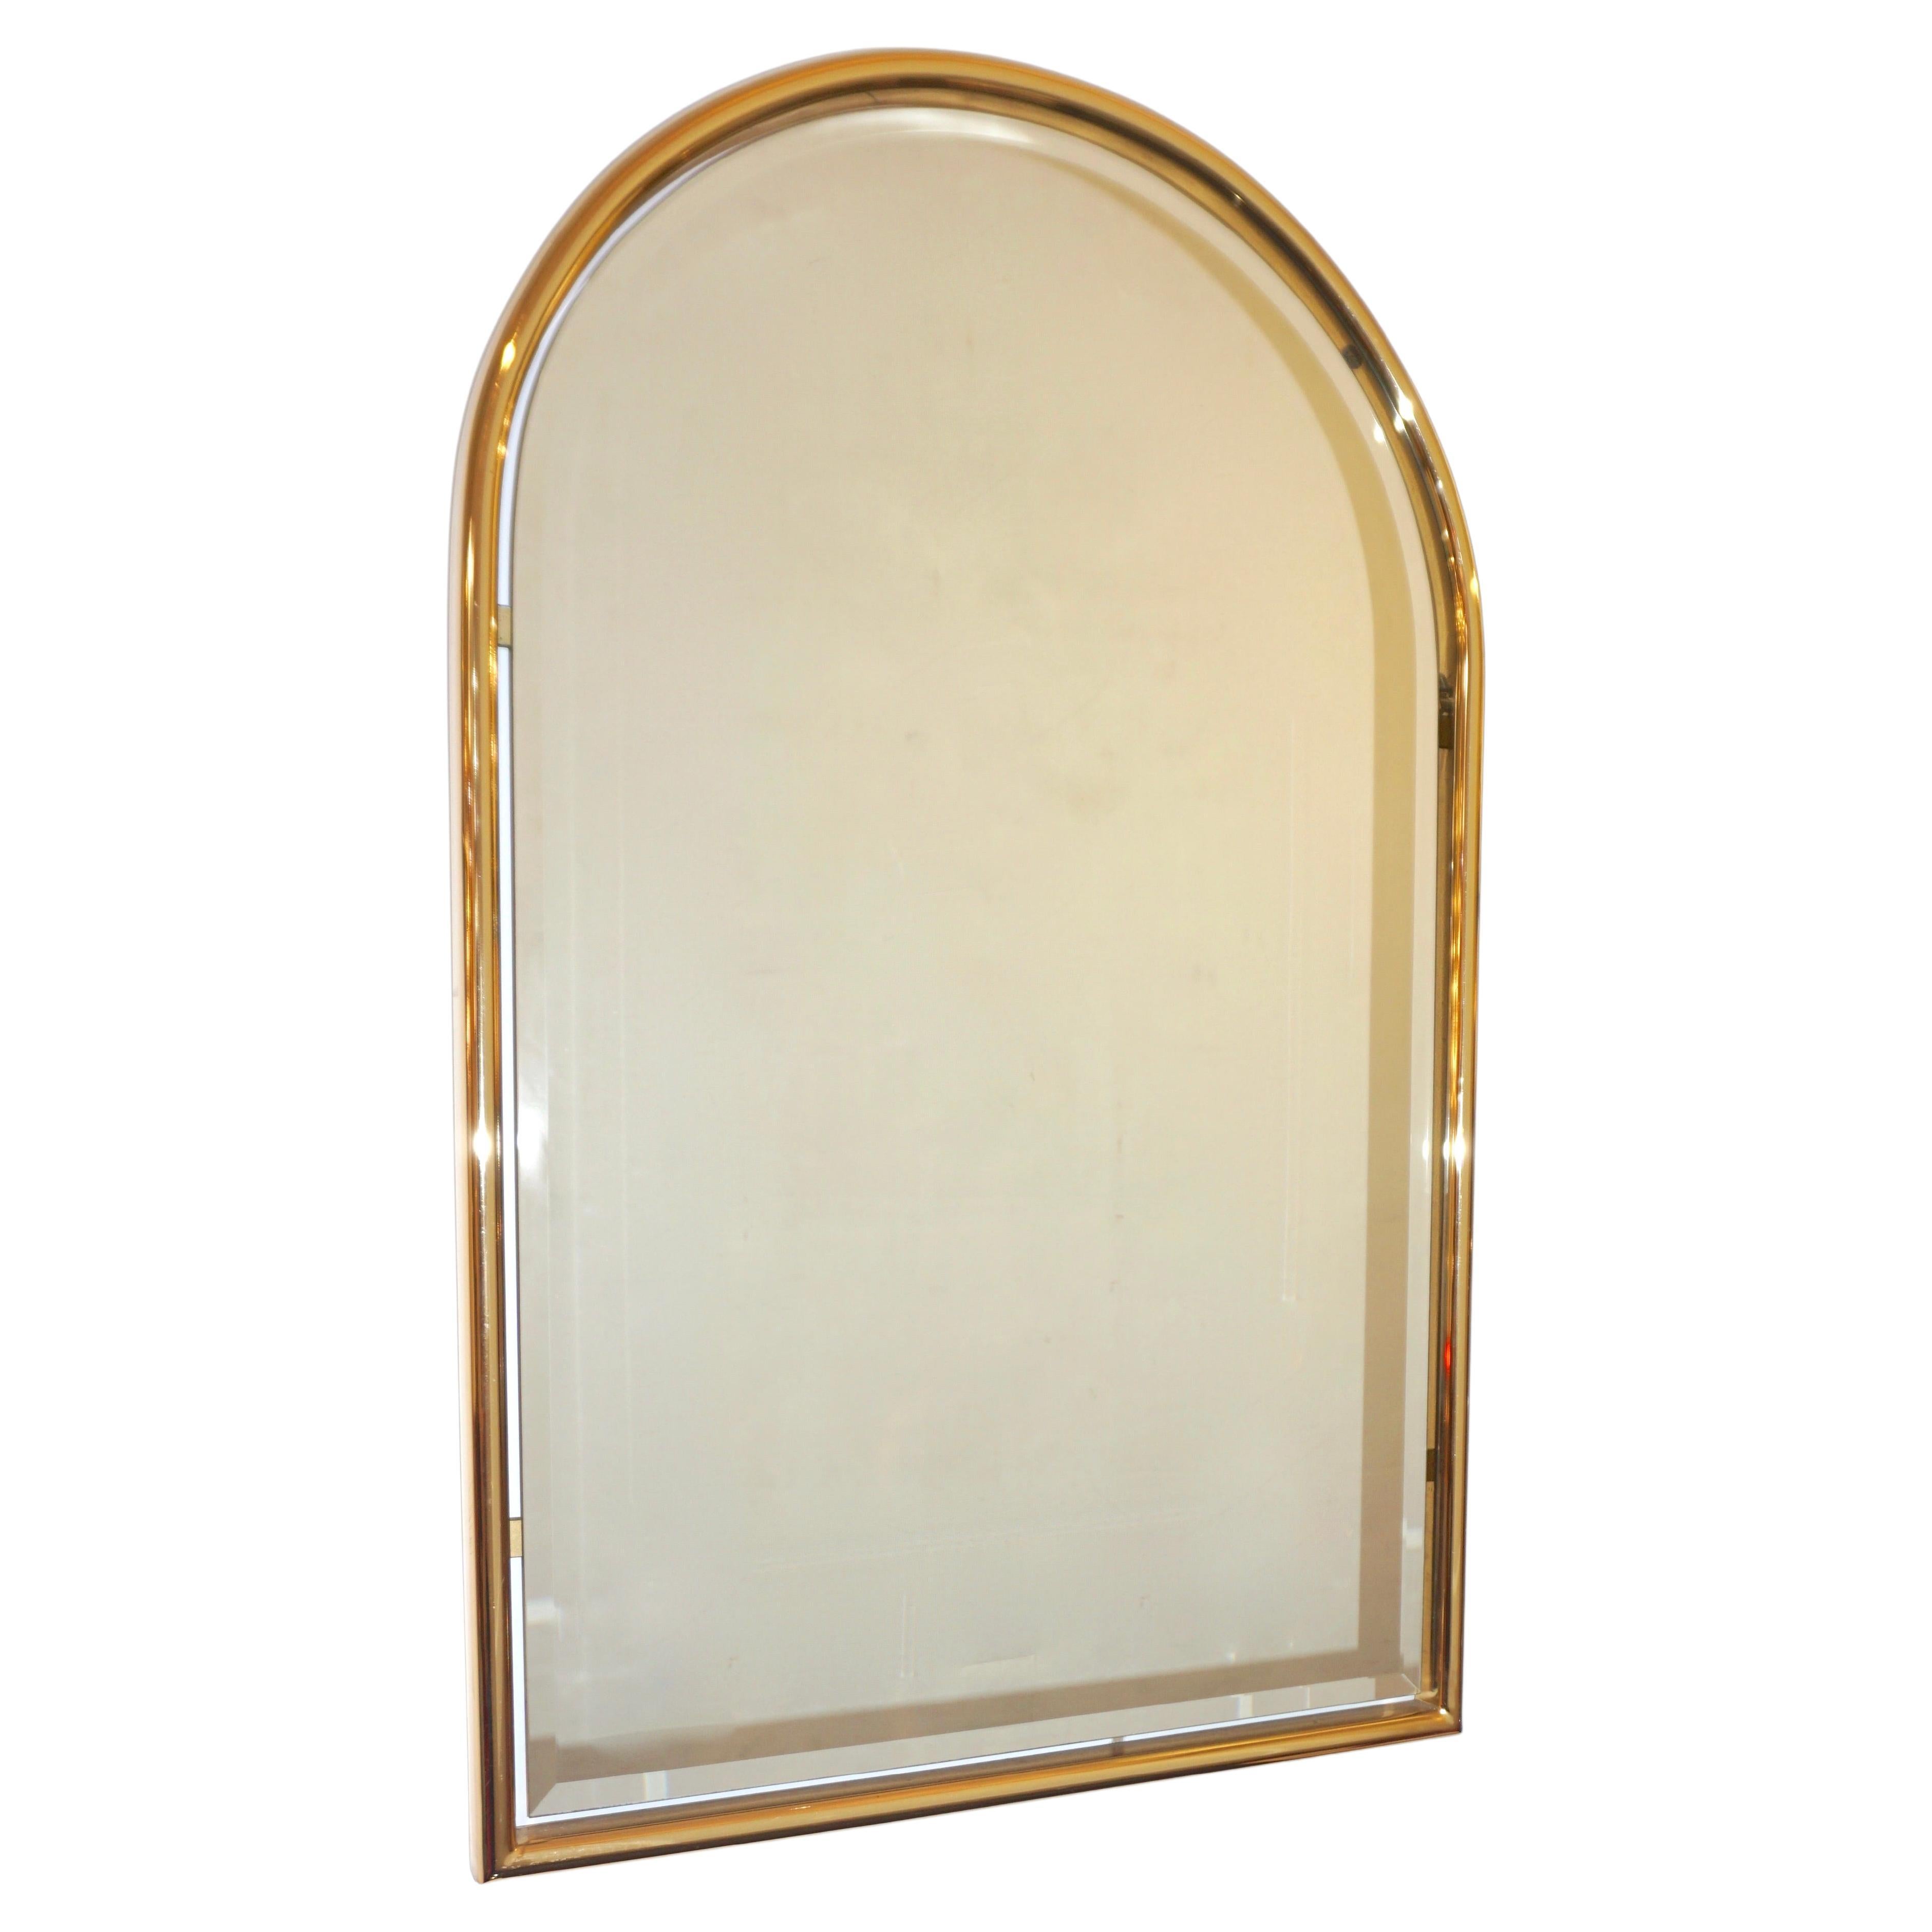 1960s Italian Minimalist Brass Floating Mirror with Round Arched Top Frame For Sale